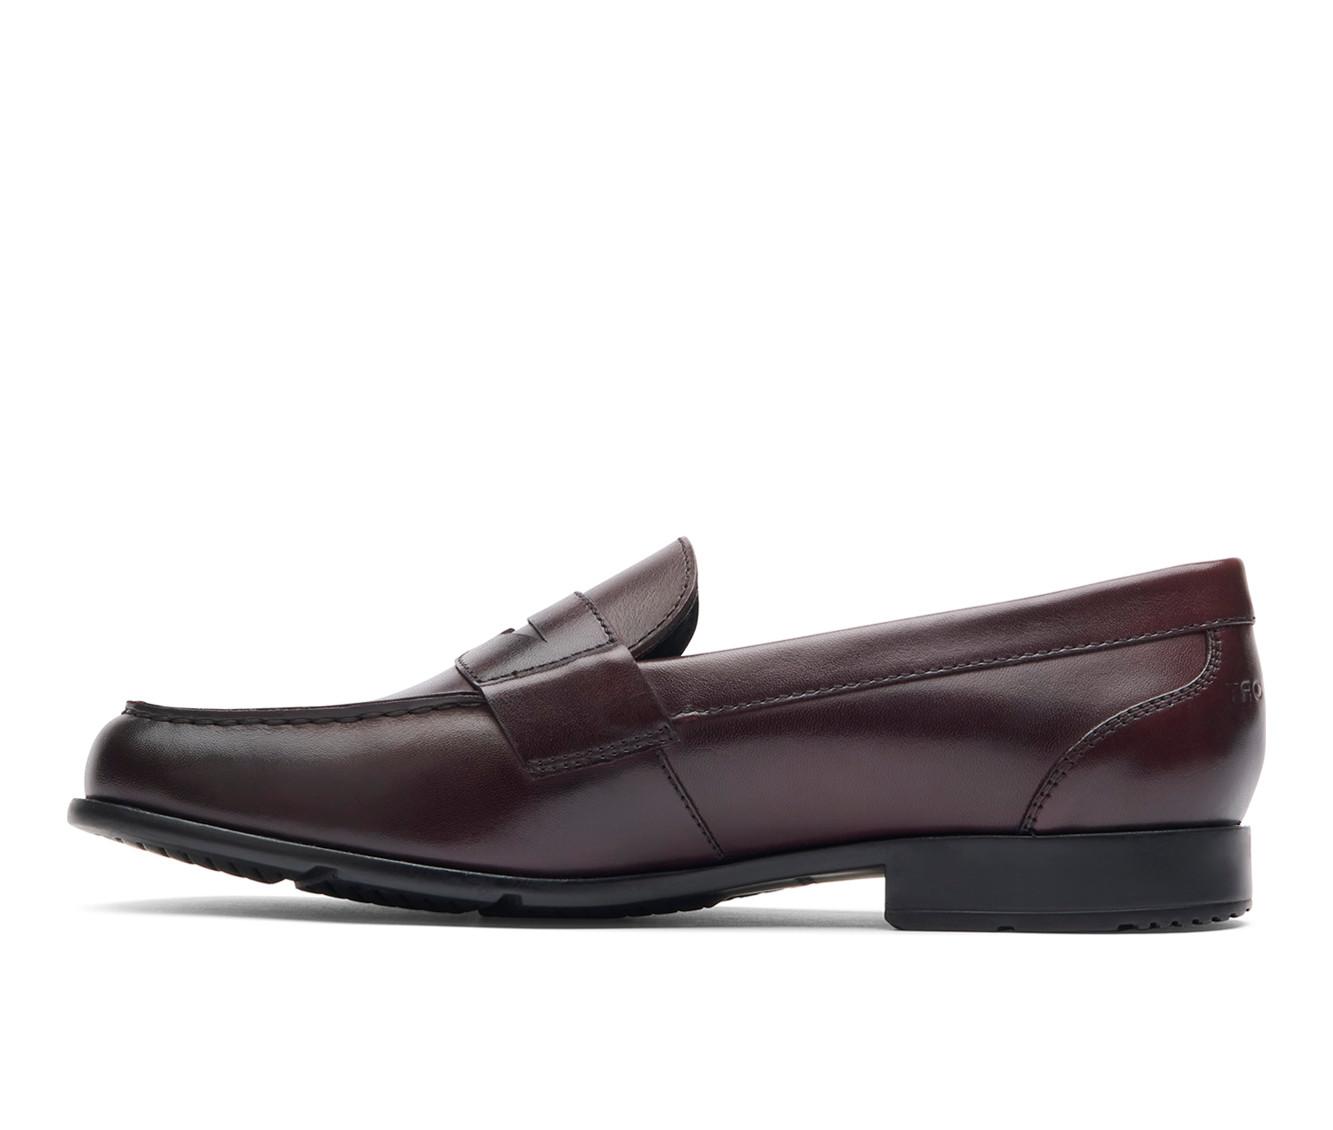 Men's Rockport Classic Penny Loafers